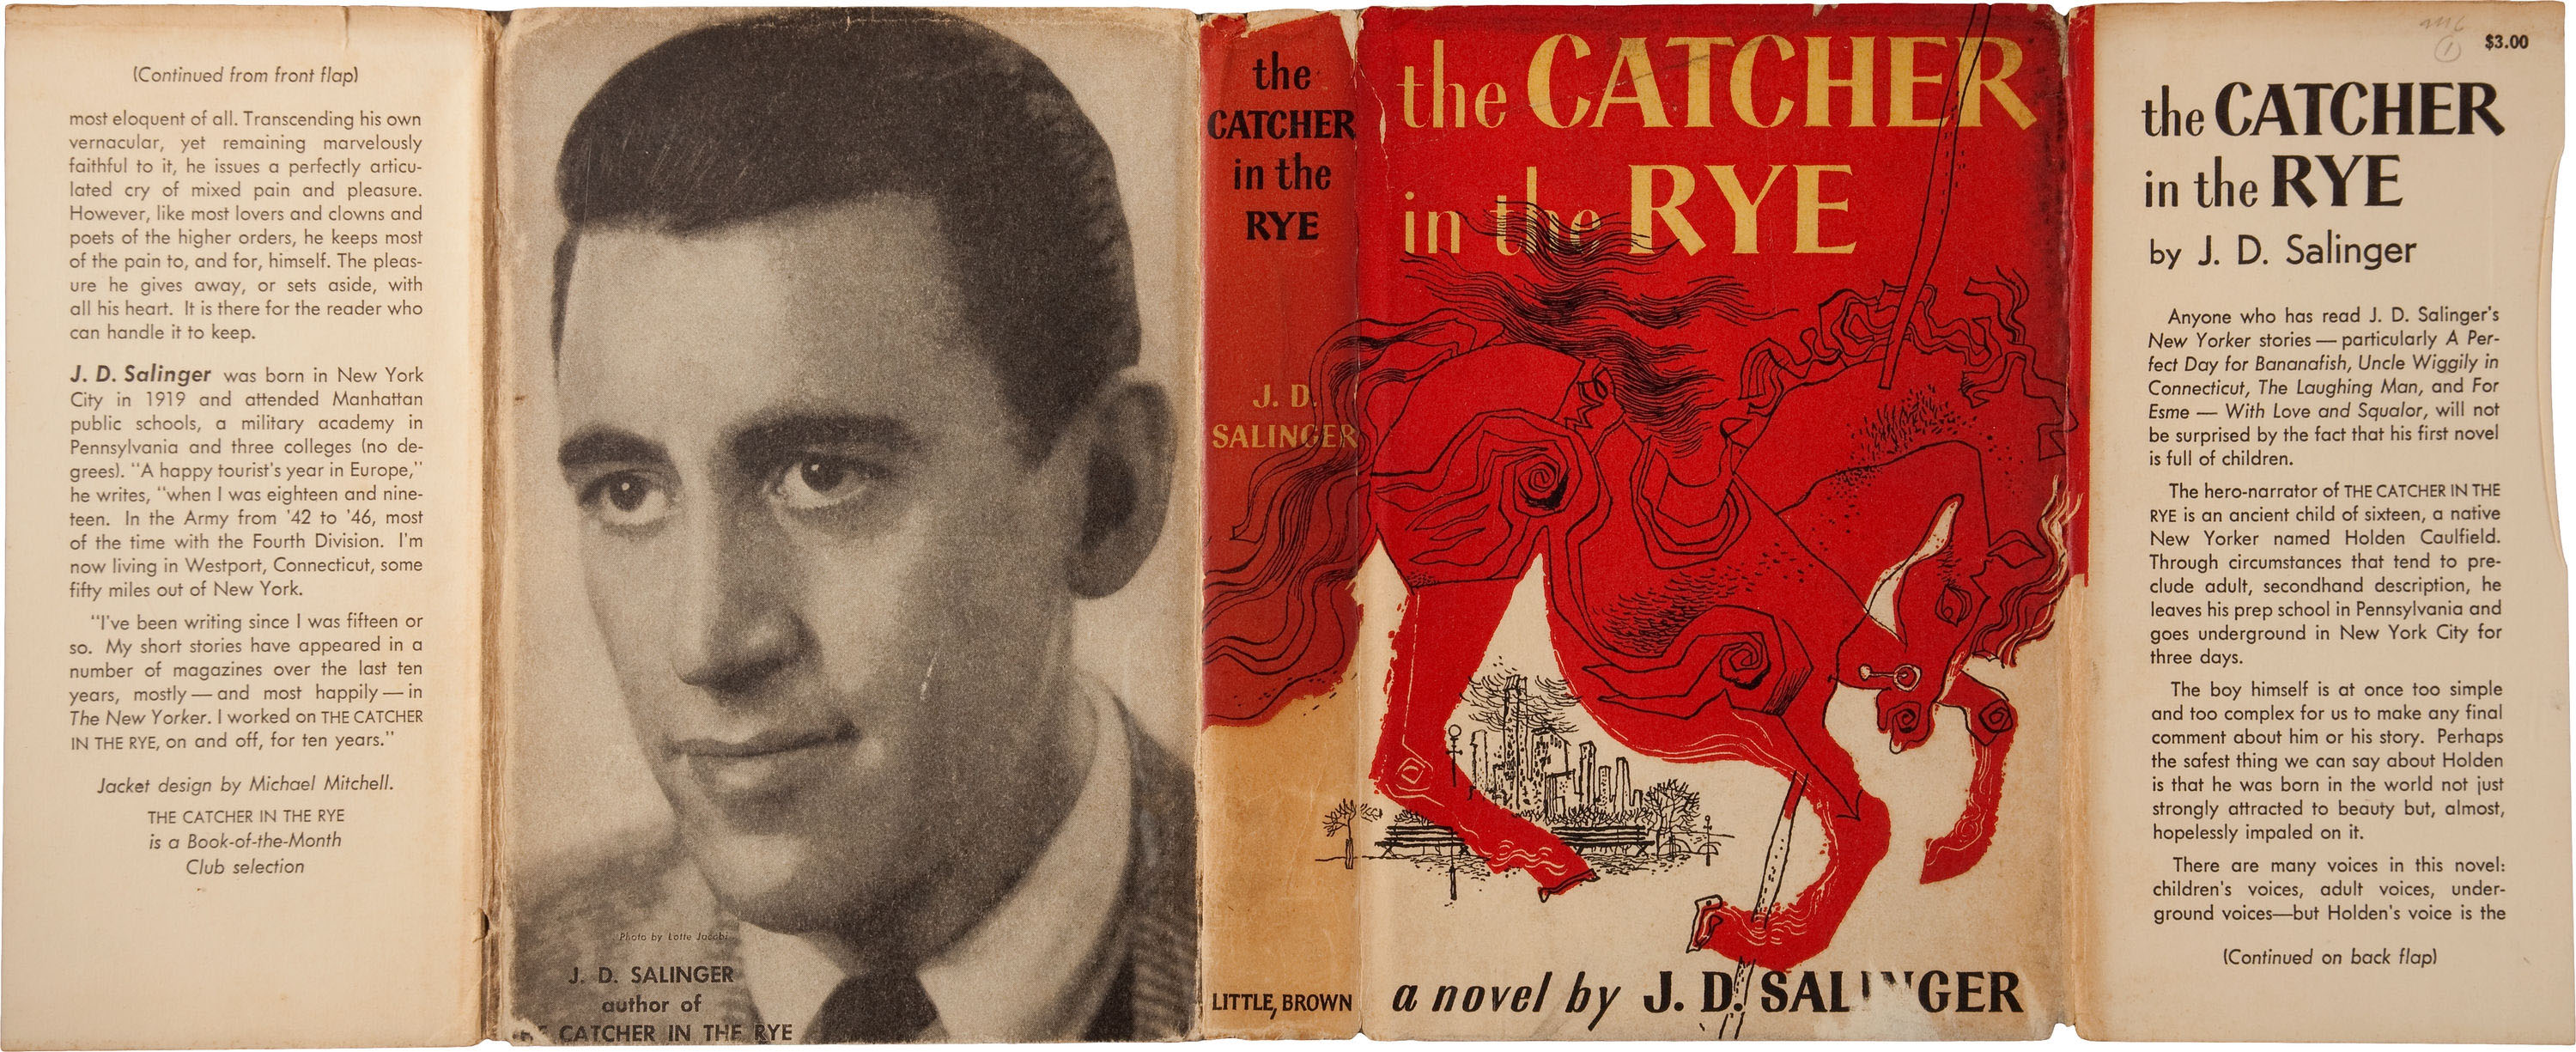 The Catcher in the Rye: banned